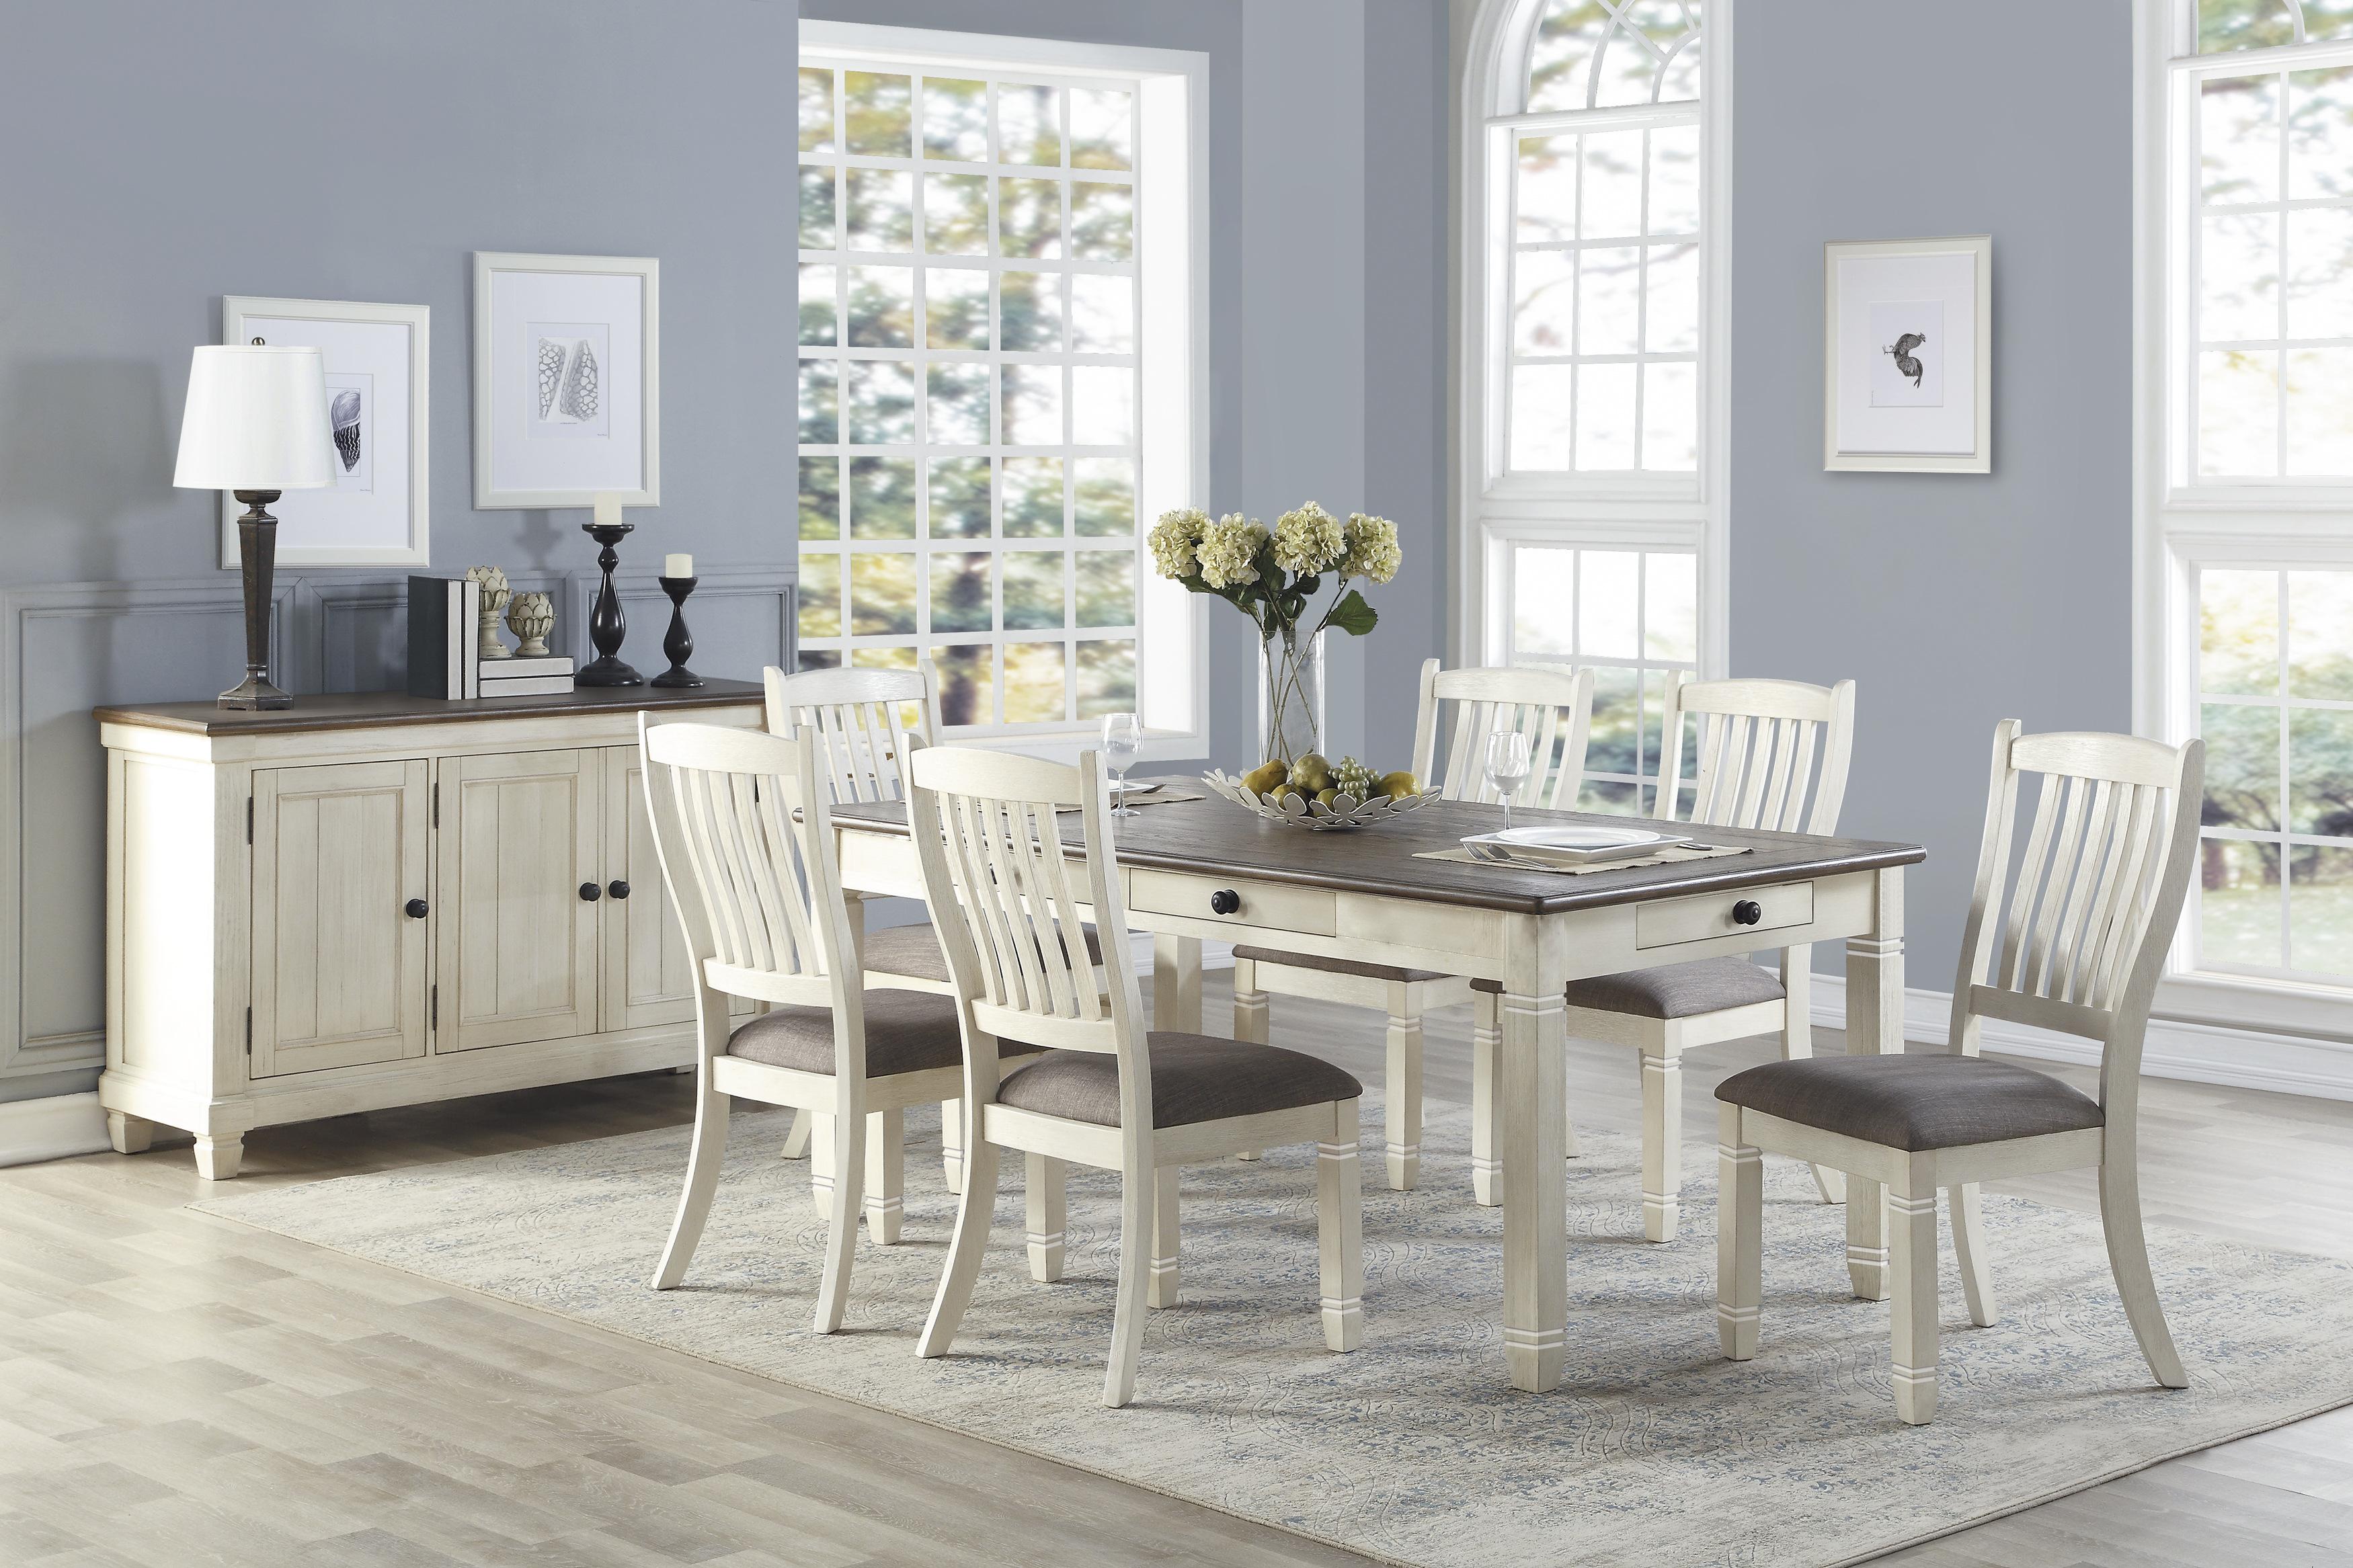 

    
5627NW-72*5PC Granby Dining Room Set
